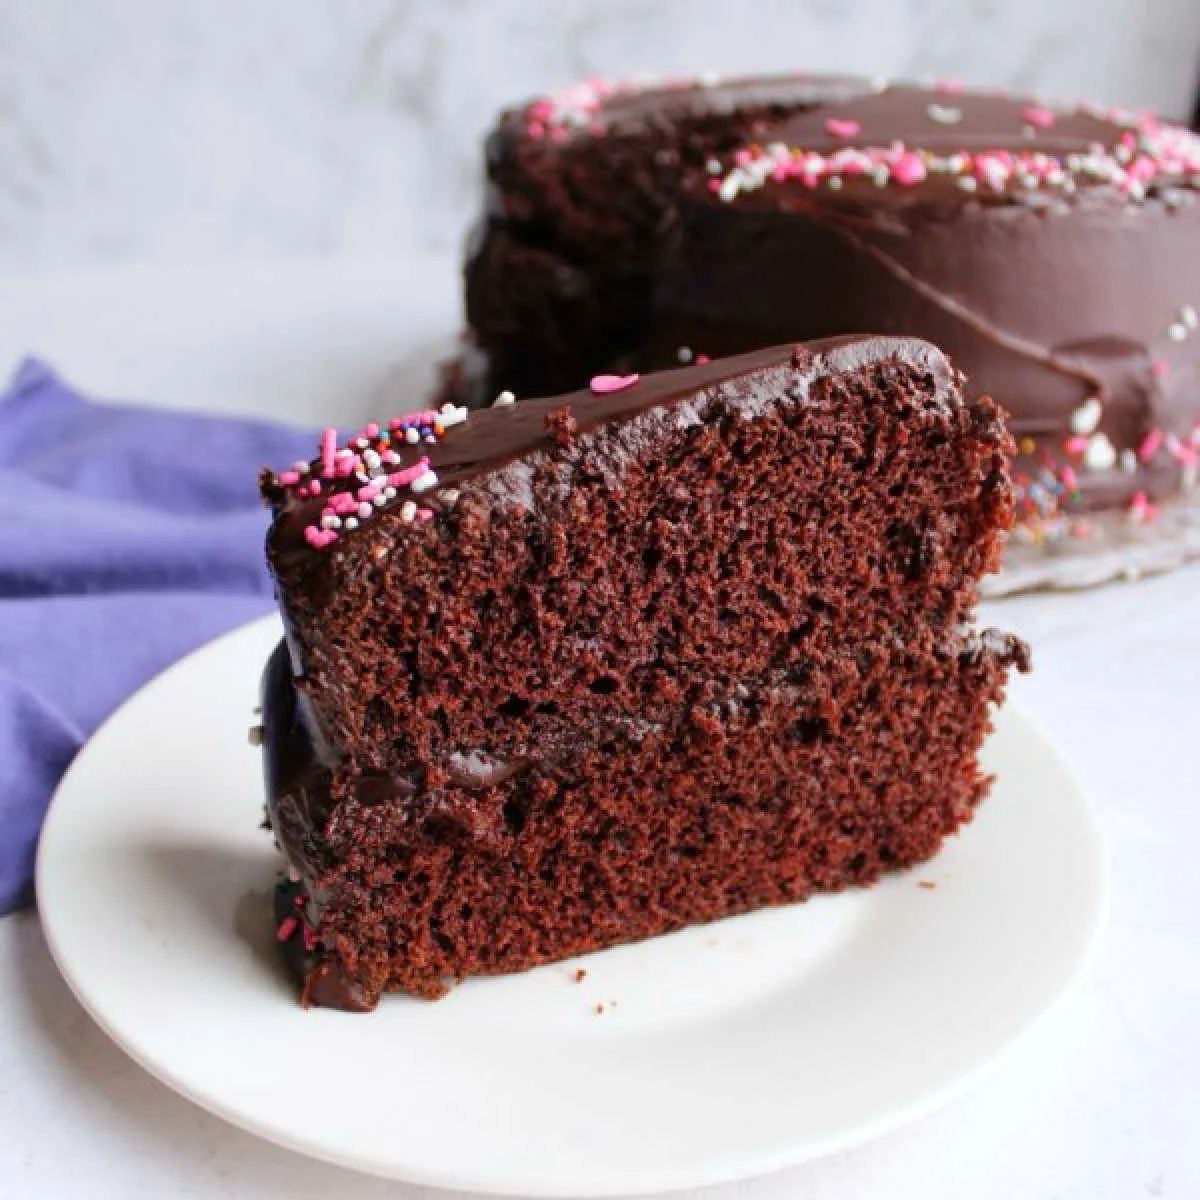 slice of moist chocolate layer cake with shiny chocolate frosting and sprinkles.